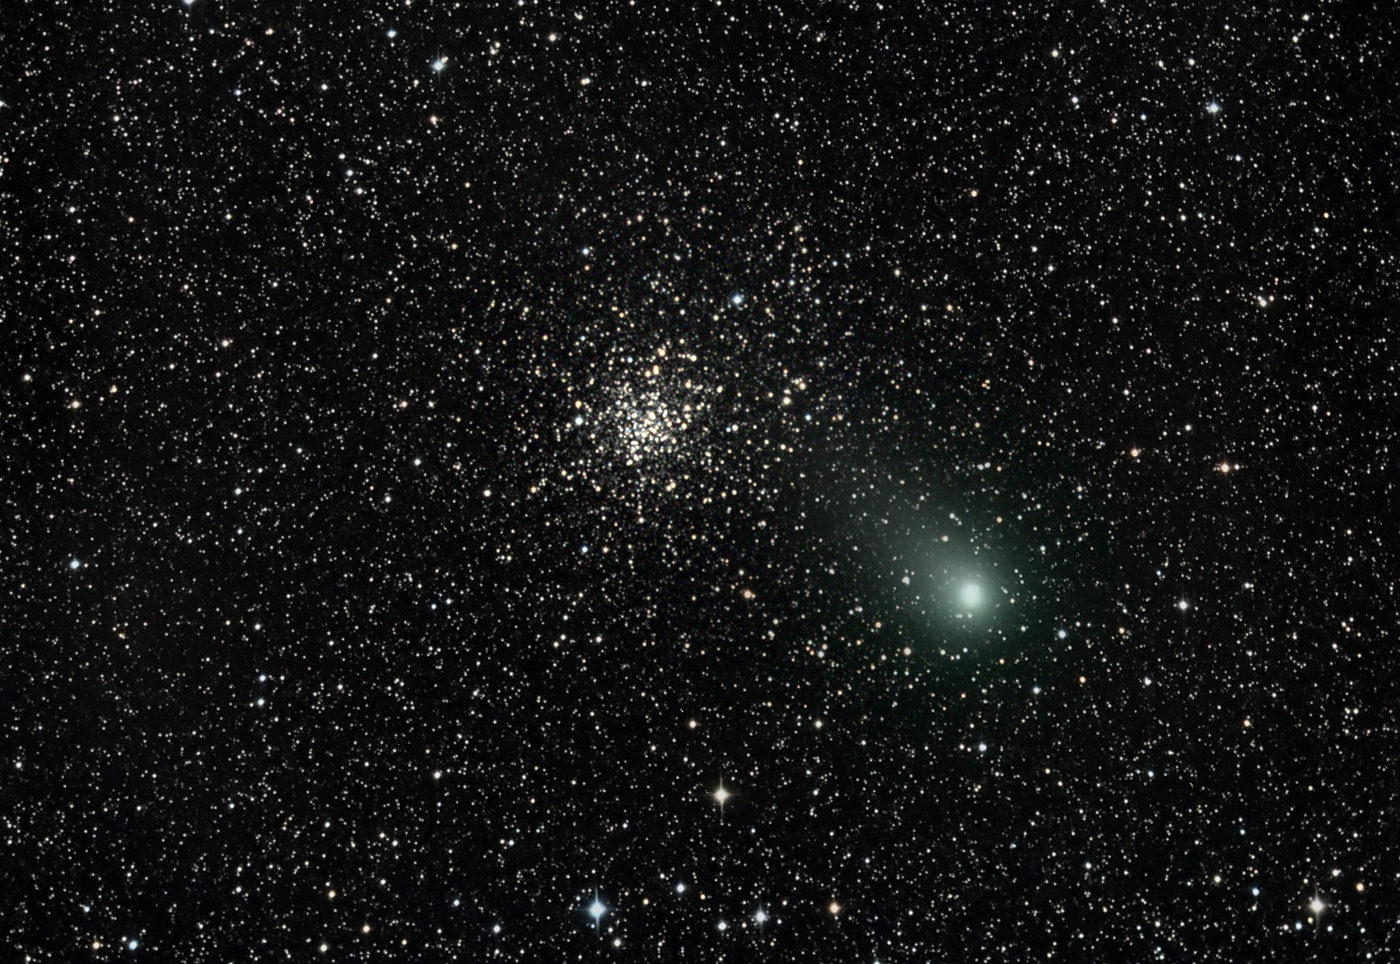 Astrophoto: Comet Garradd passing by M71 by Brian McGaffney